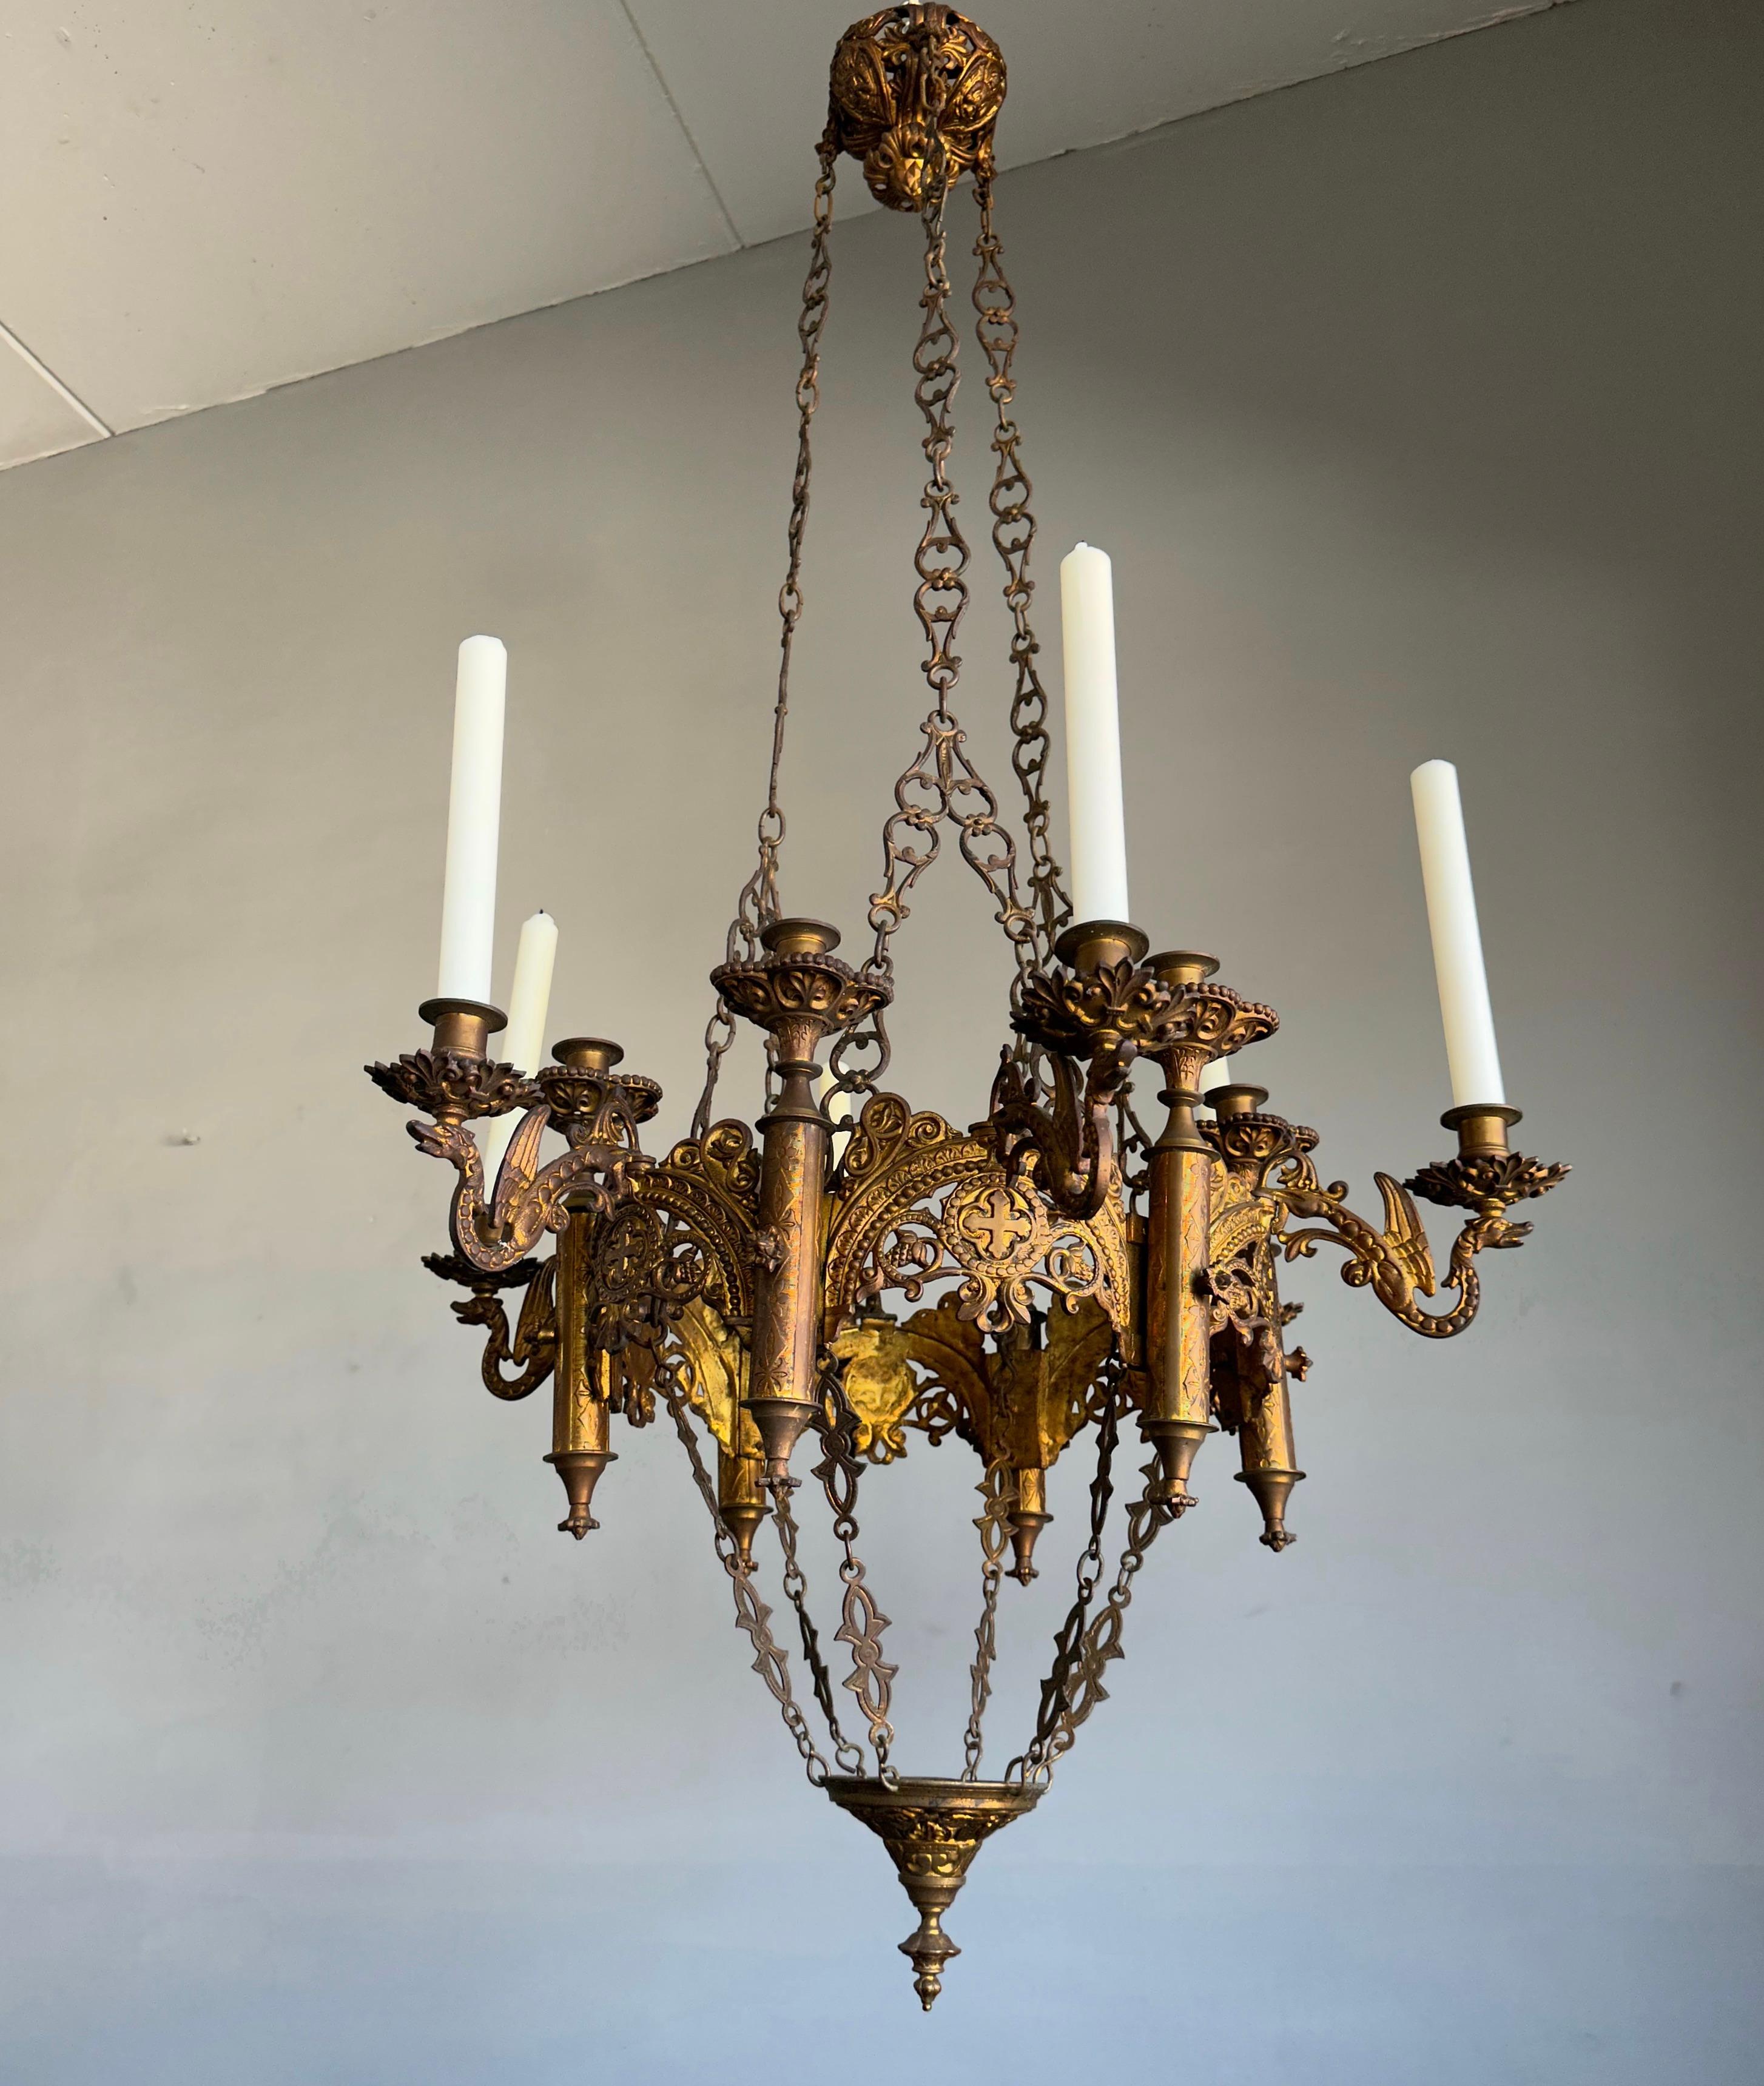 Handcrafted and truly beautiful Gothic chandelier for candles.

In antiques it often is the case that the older a piece is, the better the quality and the details. This pre 1900s, rare and highly decorative Gothic style chandelier is no exception to